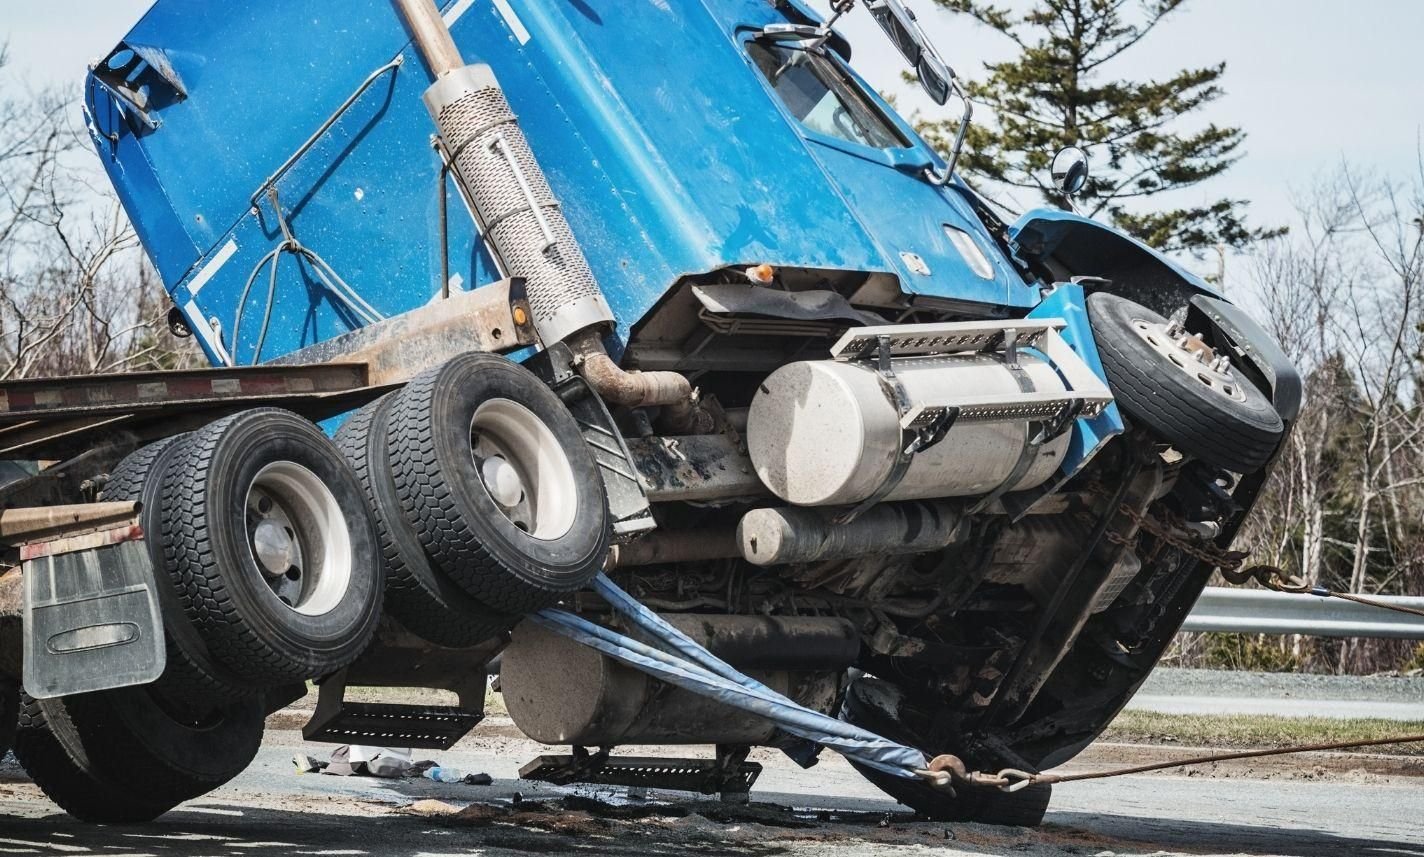 vidette-commercial-truck-accident-injury-lawyer